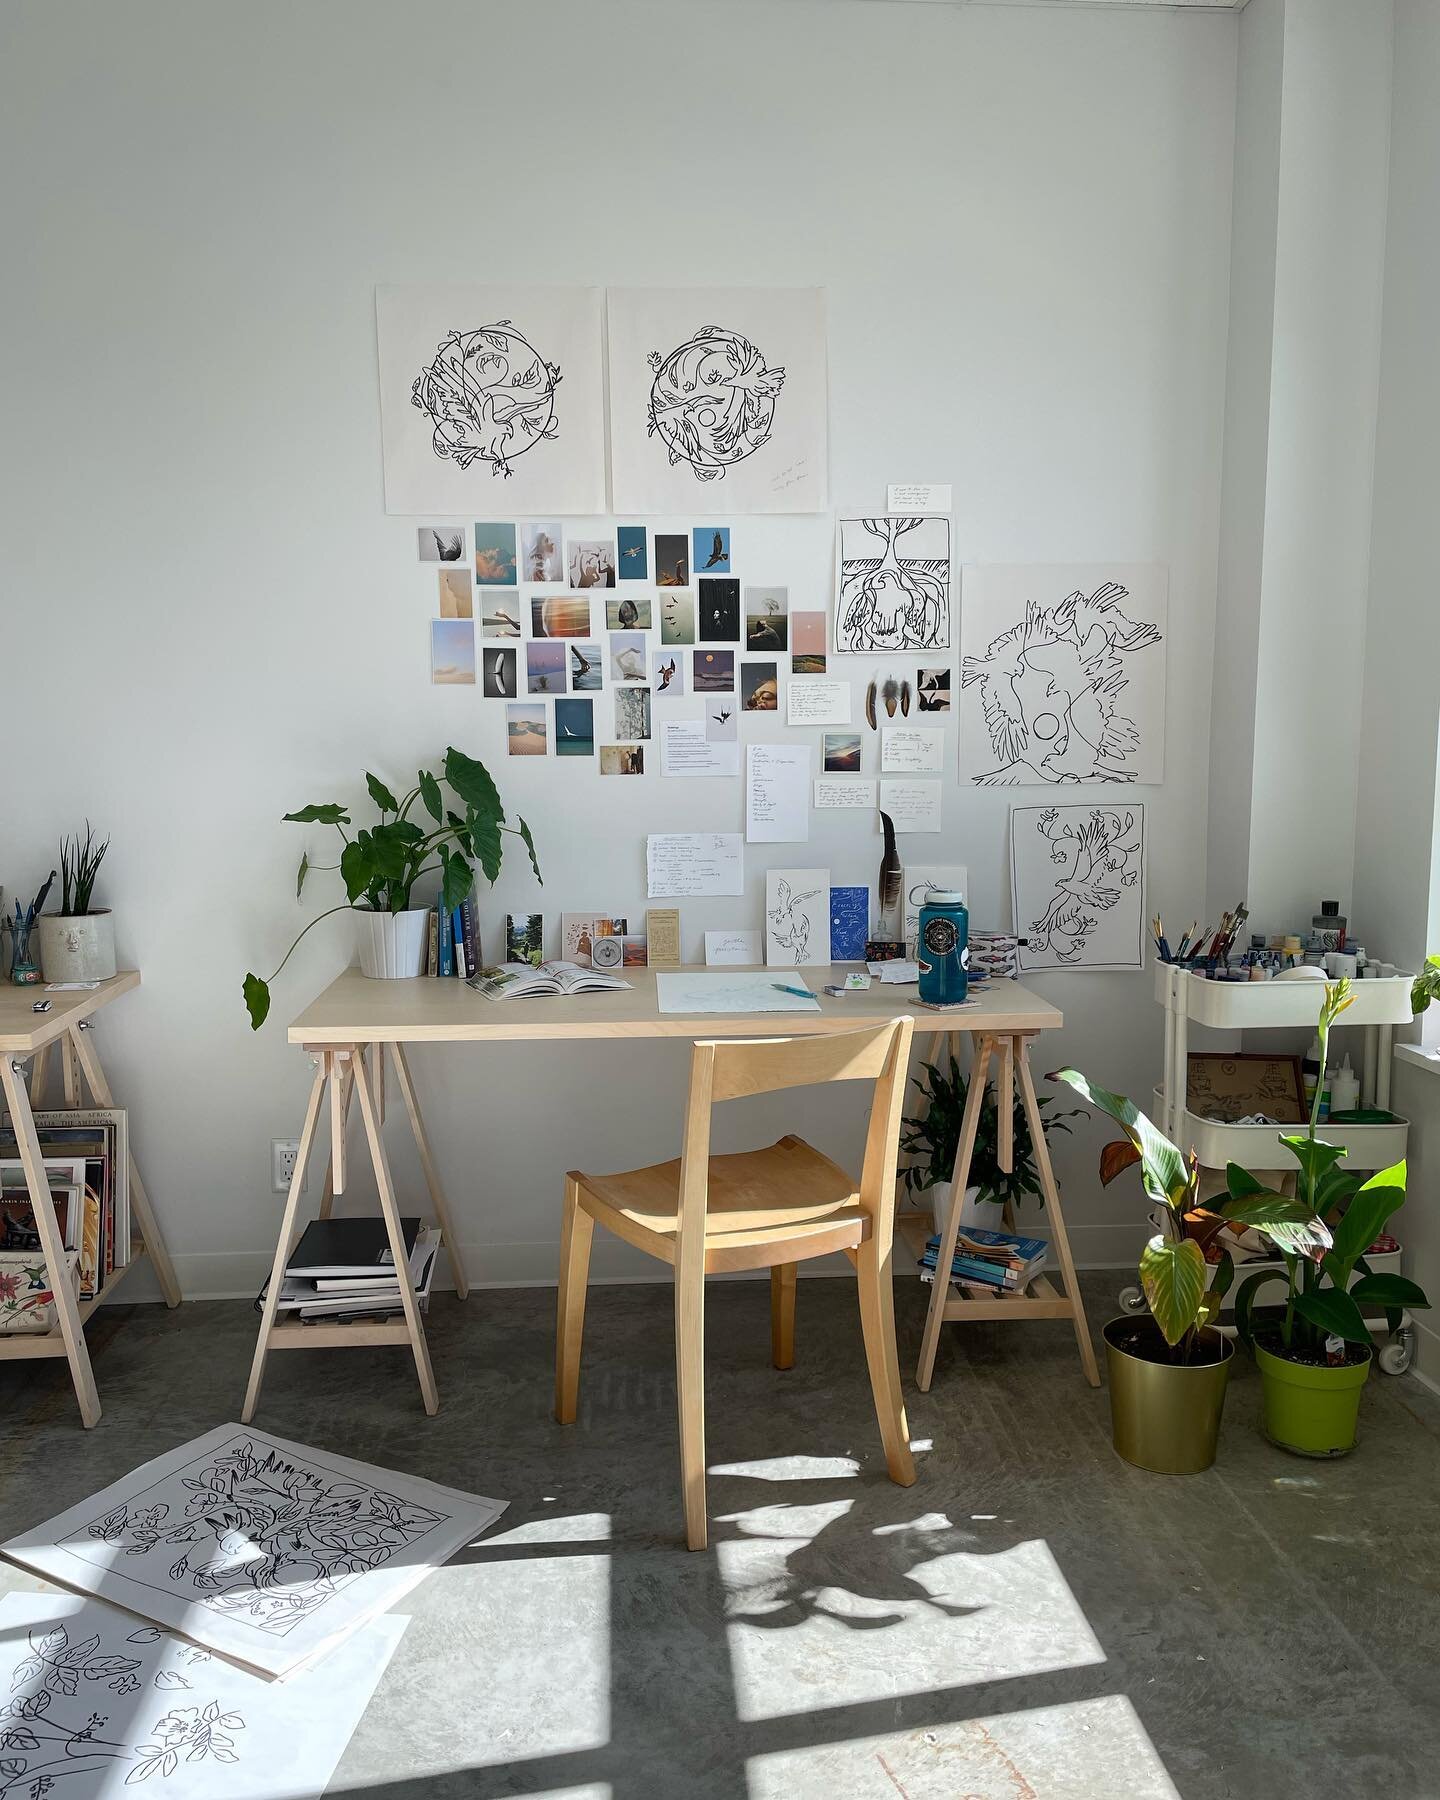 We&rsquo;re looking for a new studiomate at our new space @livingroomstudio.ca !
Unfortunately one of our lovely studiomates needs to leave, so we&rsquo;re looking for one person who&rsquo;d like to join us! 
🌿
$375/month
move in date between Oct 1-